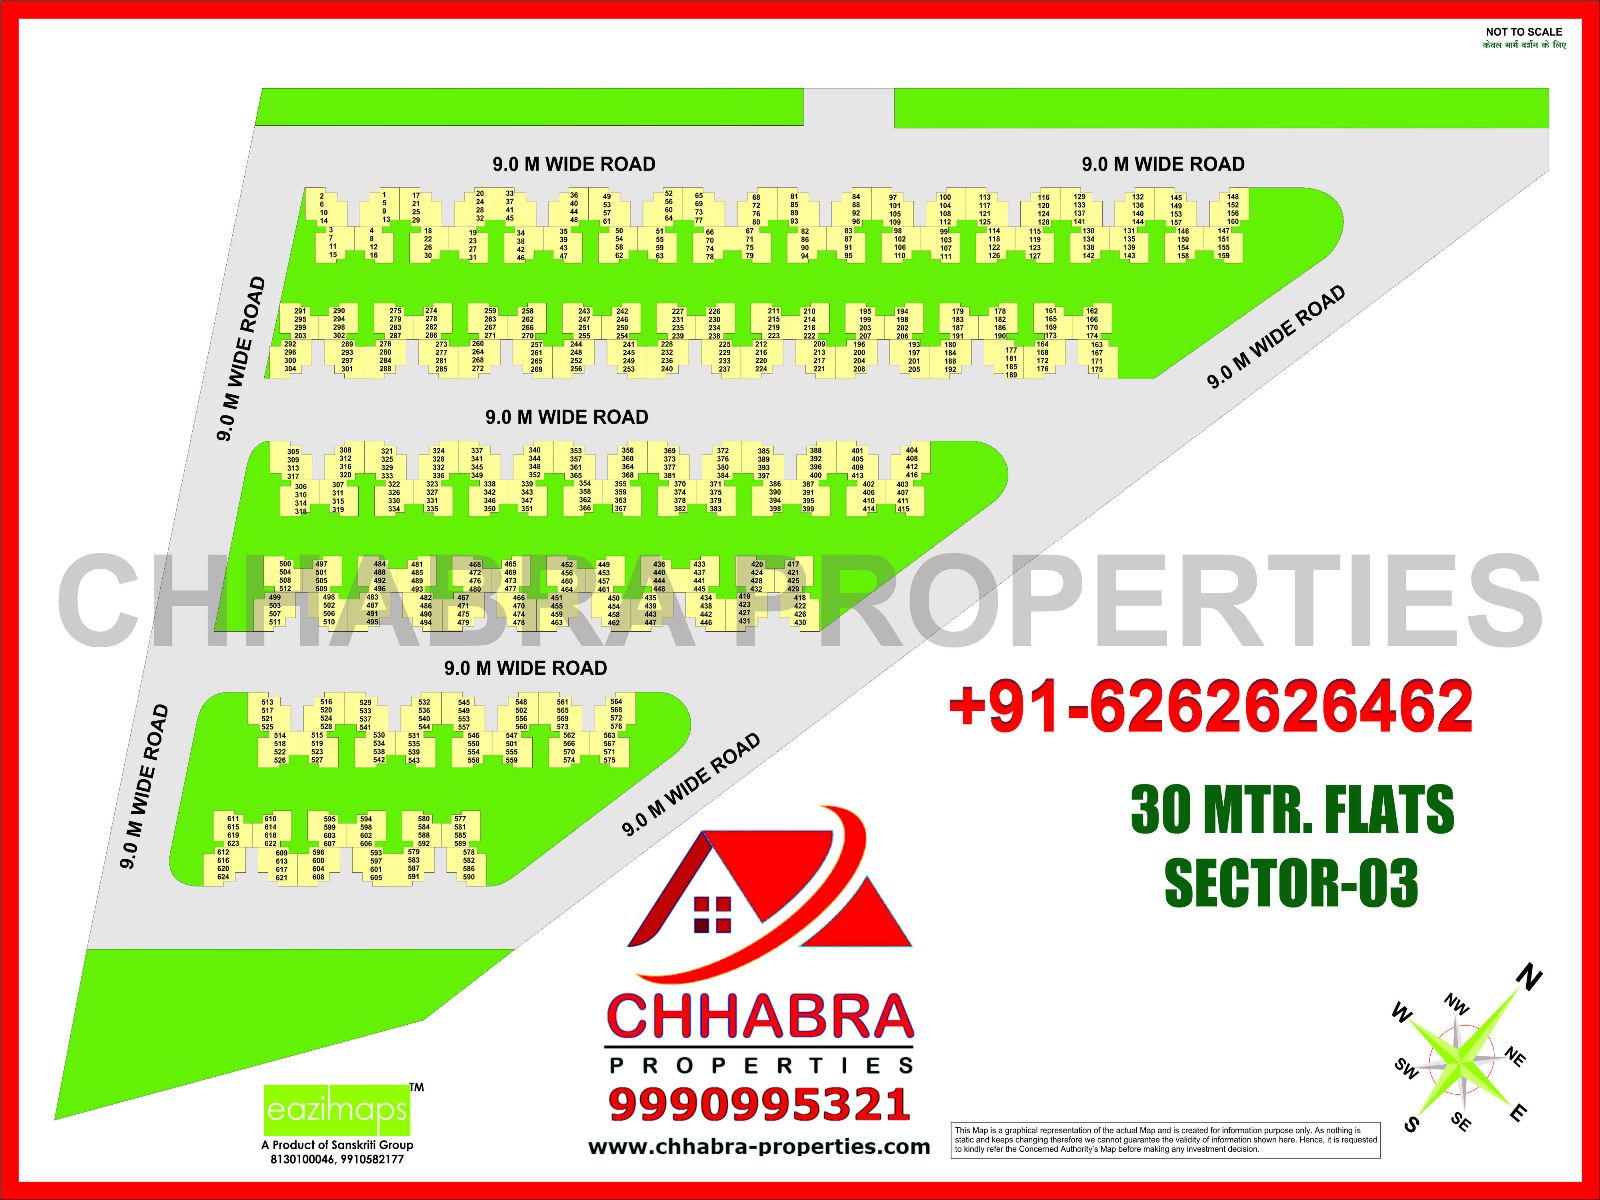 layout plan for 30mtr flats sector 03 hd map